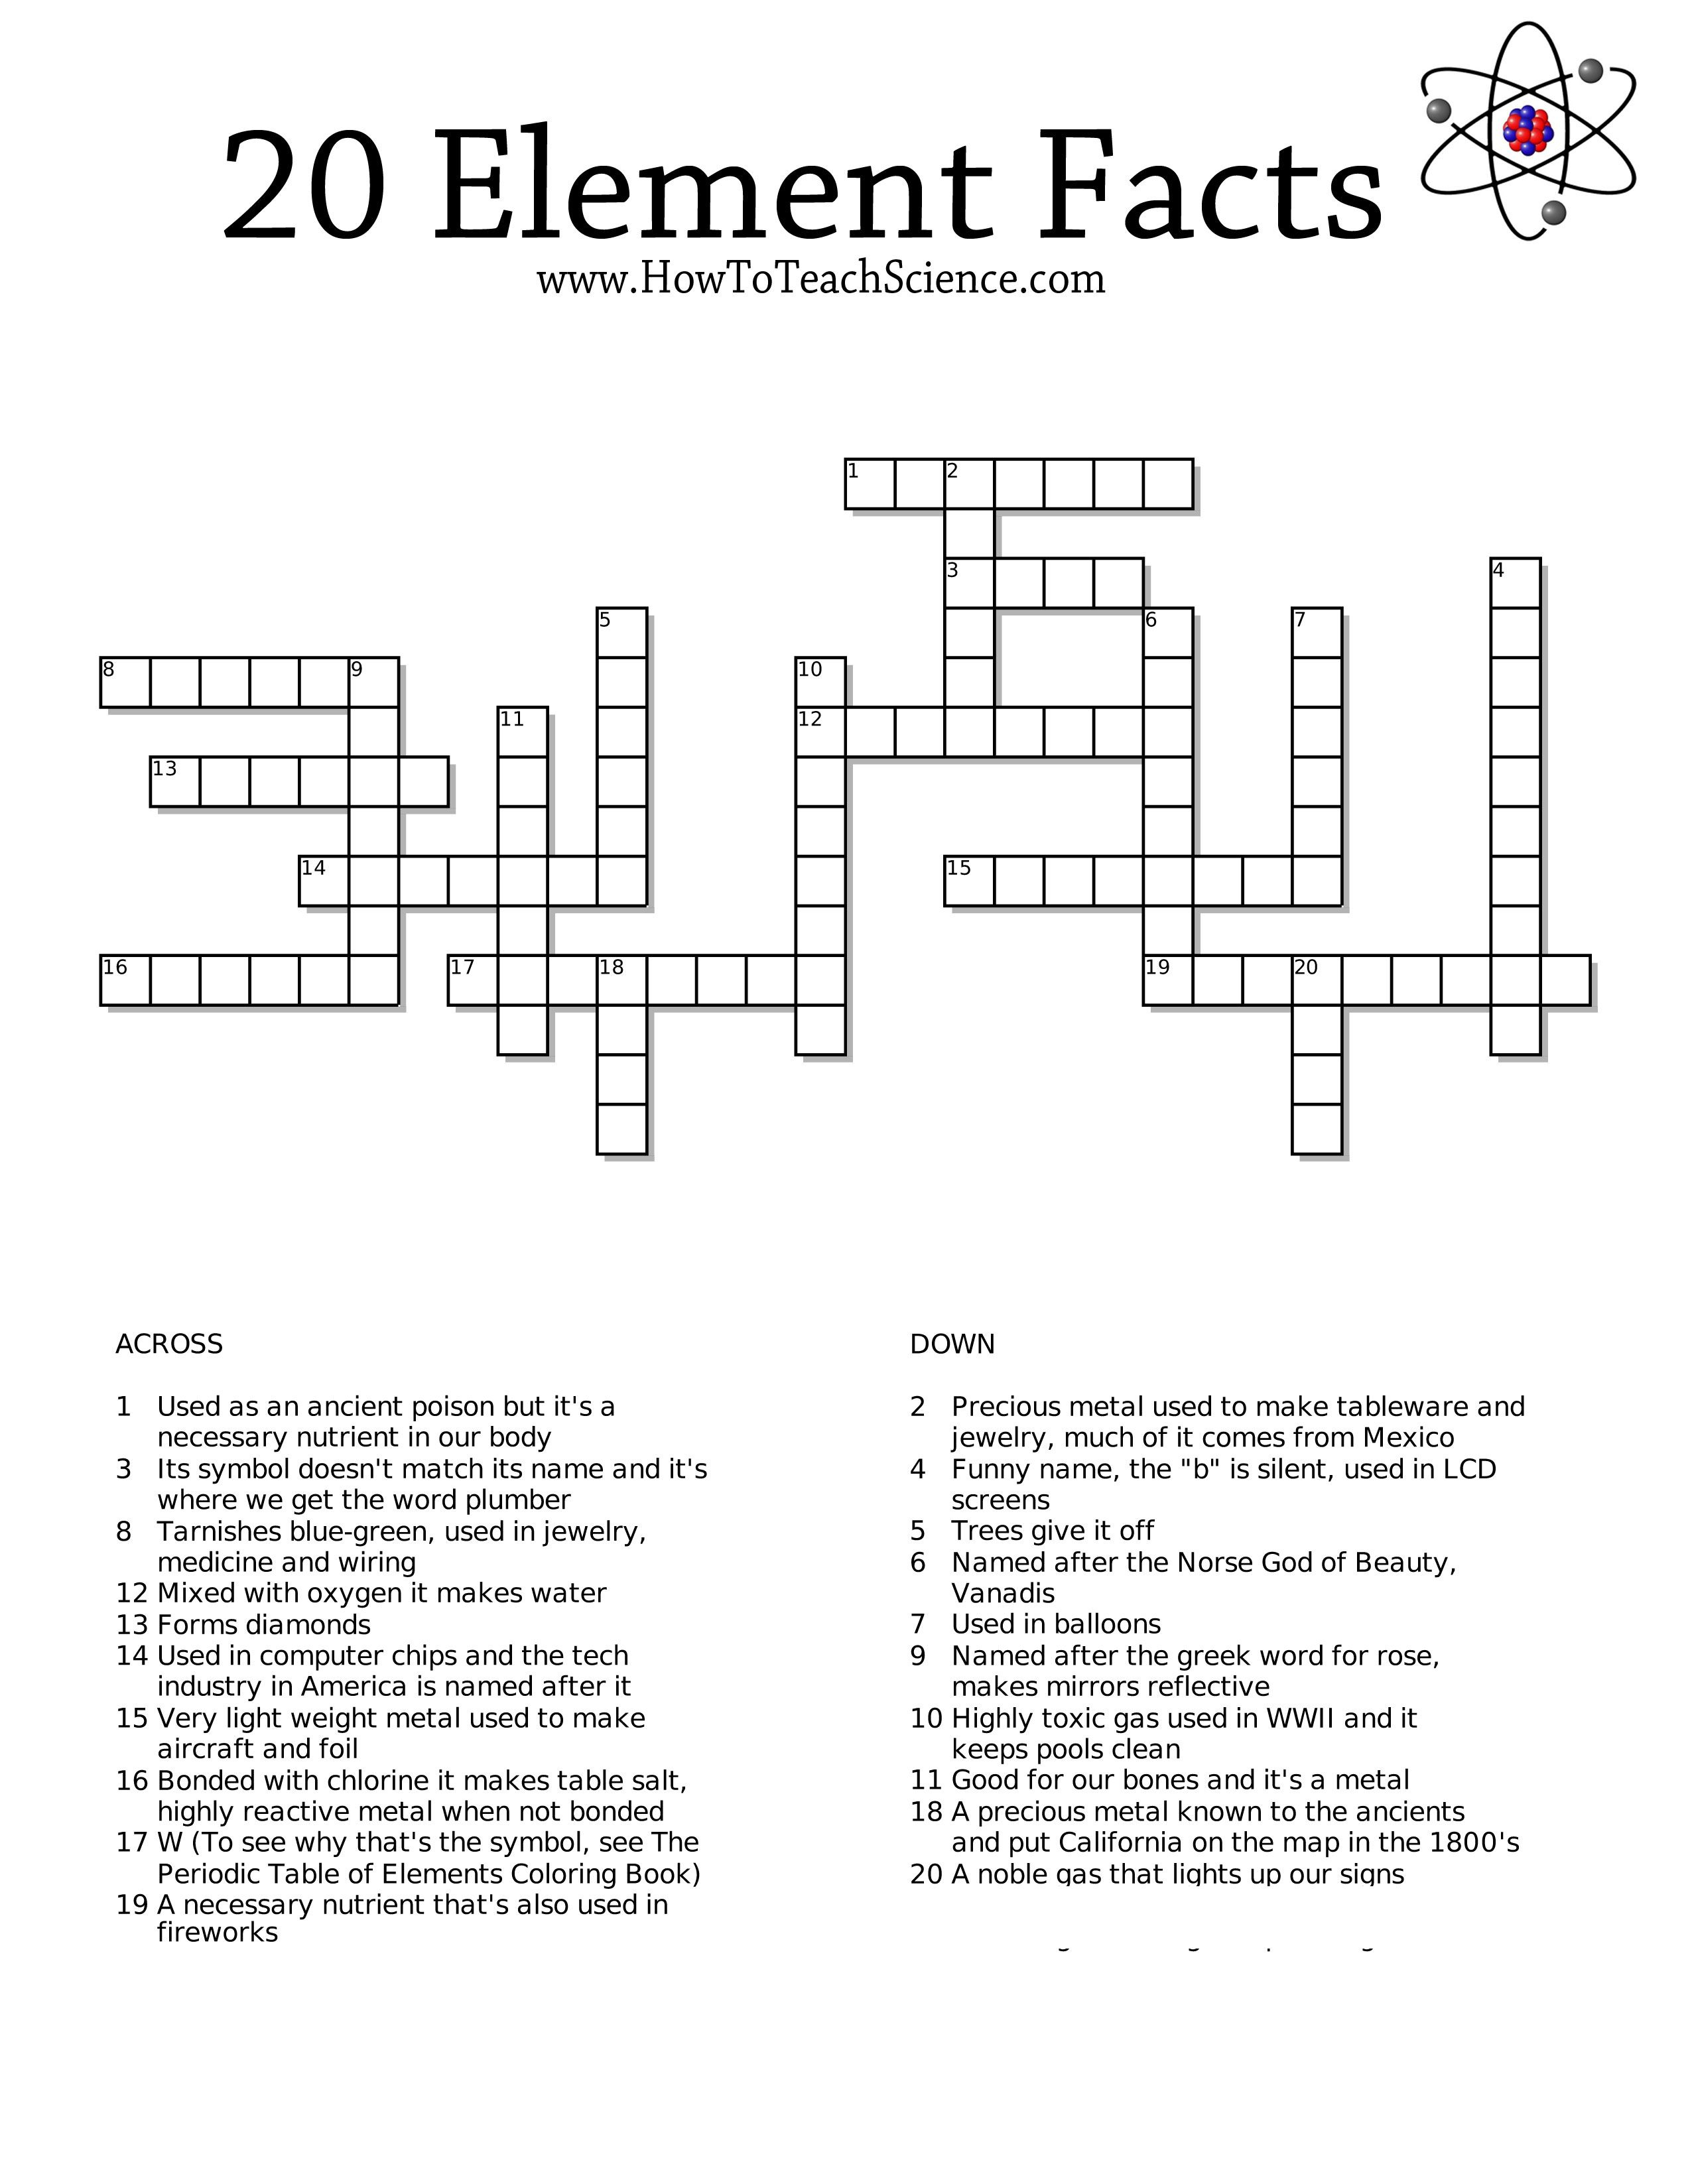 Free Crossword Printables On The Elements For 3Rd Grade Through High - Printable Crossword Puzzles For Third Graders